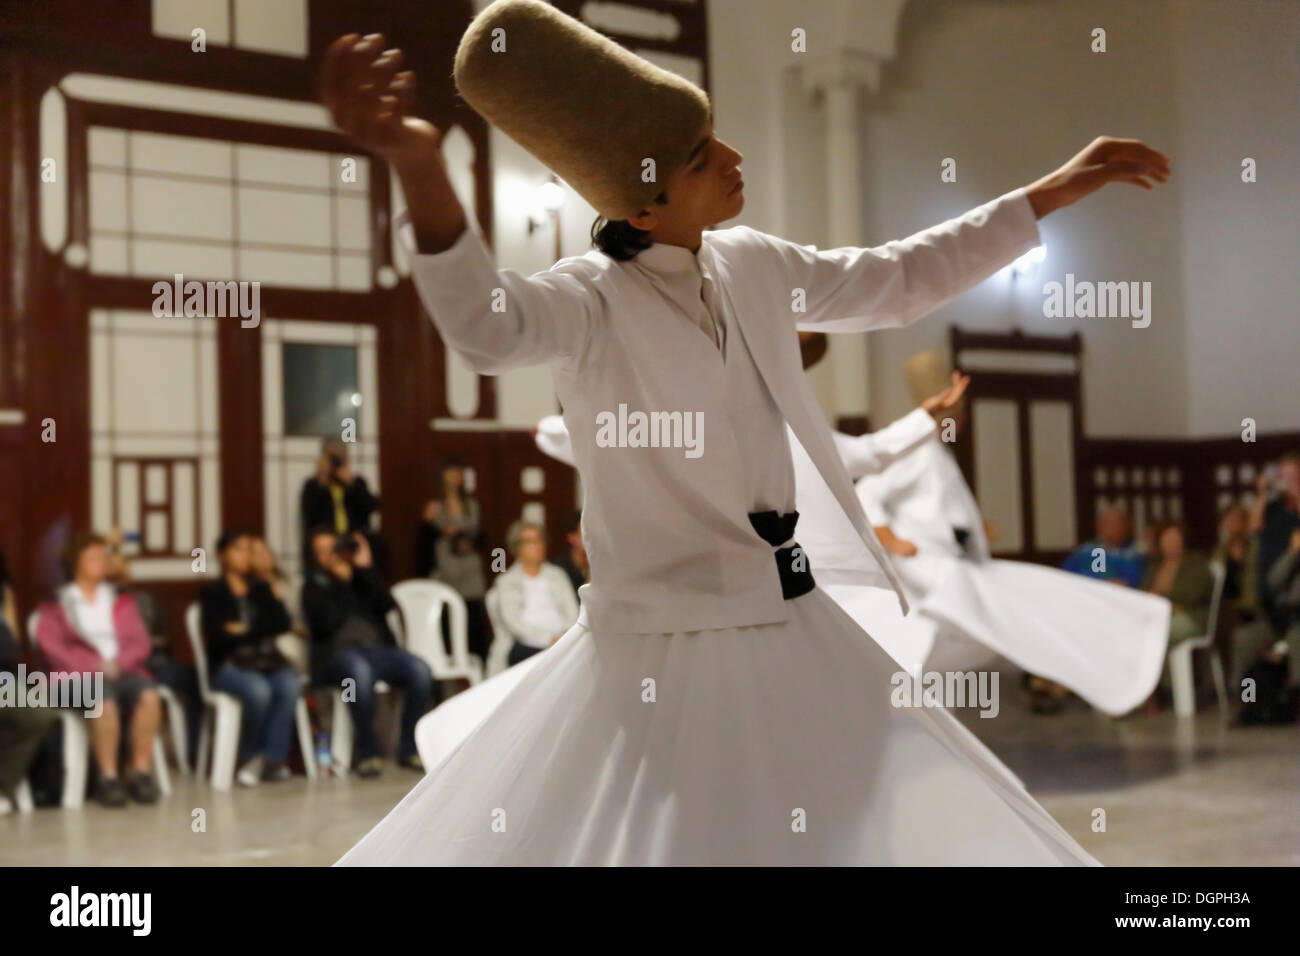 Whirling Dervishes dancing the Sema, a Dervish dance, Sirkeci Railway Station, Istanbul, Turkey, Europe, Istanbul Stock Photo